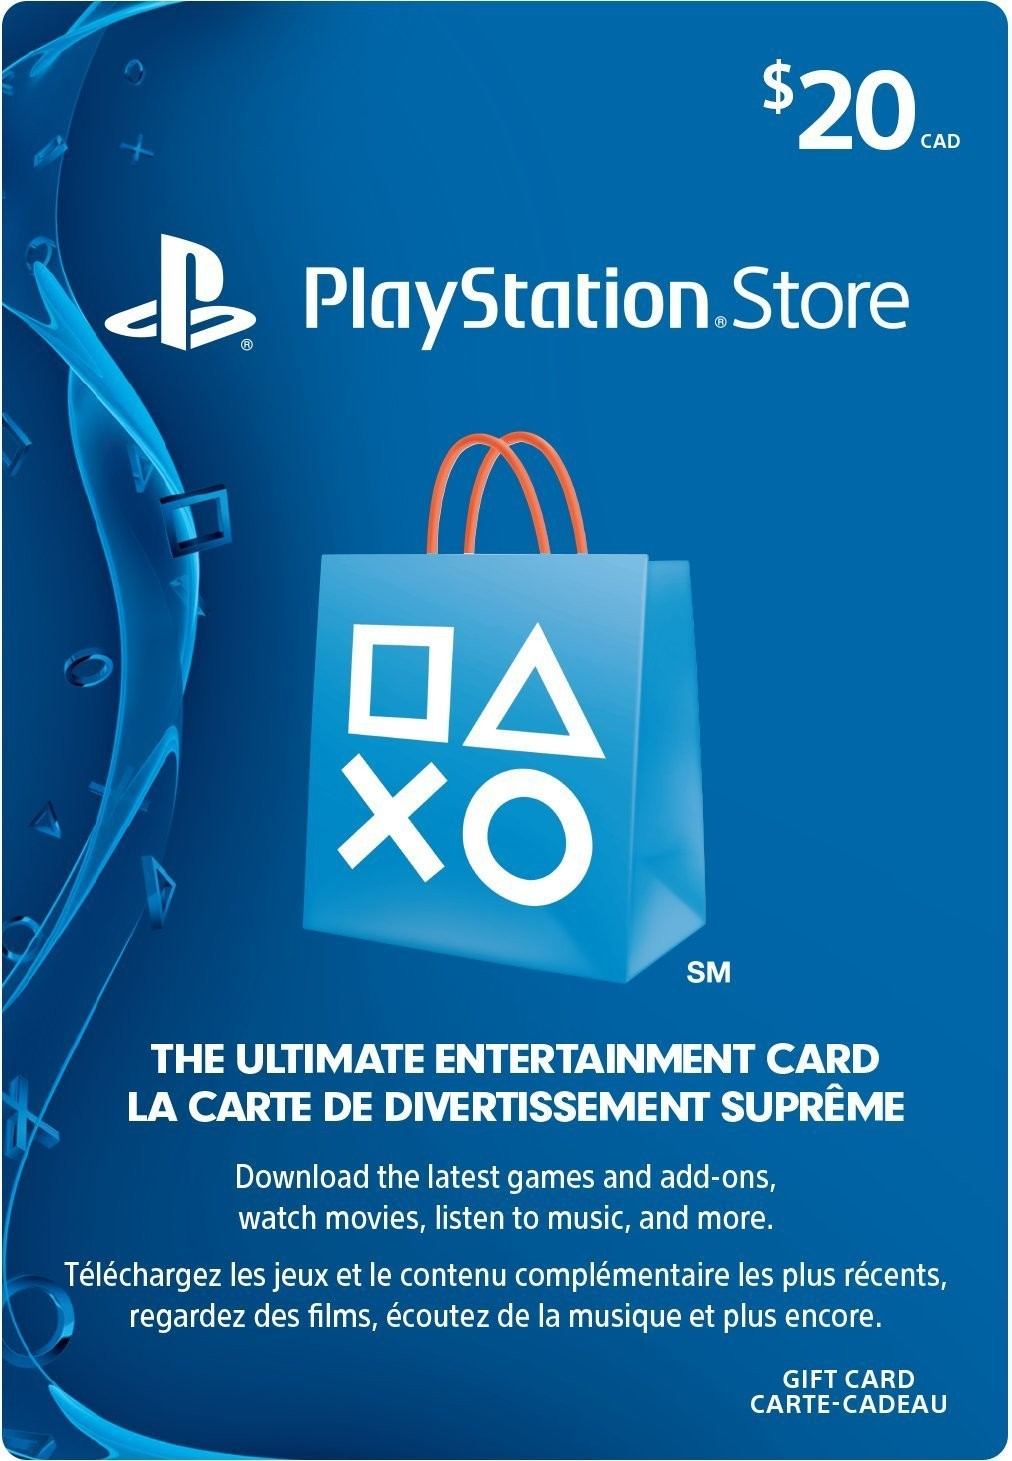 PlayStation Network (CAD$ 20 / Canada network only) for PSP, PS3, PSP Go, PS Vita, PS4